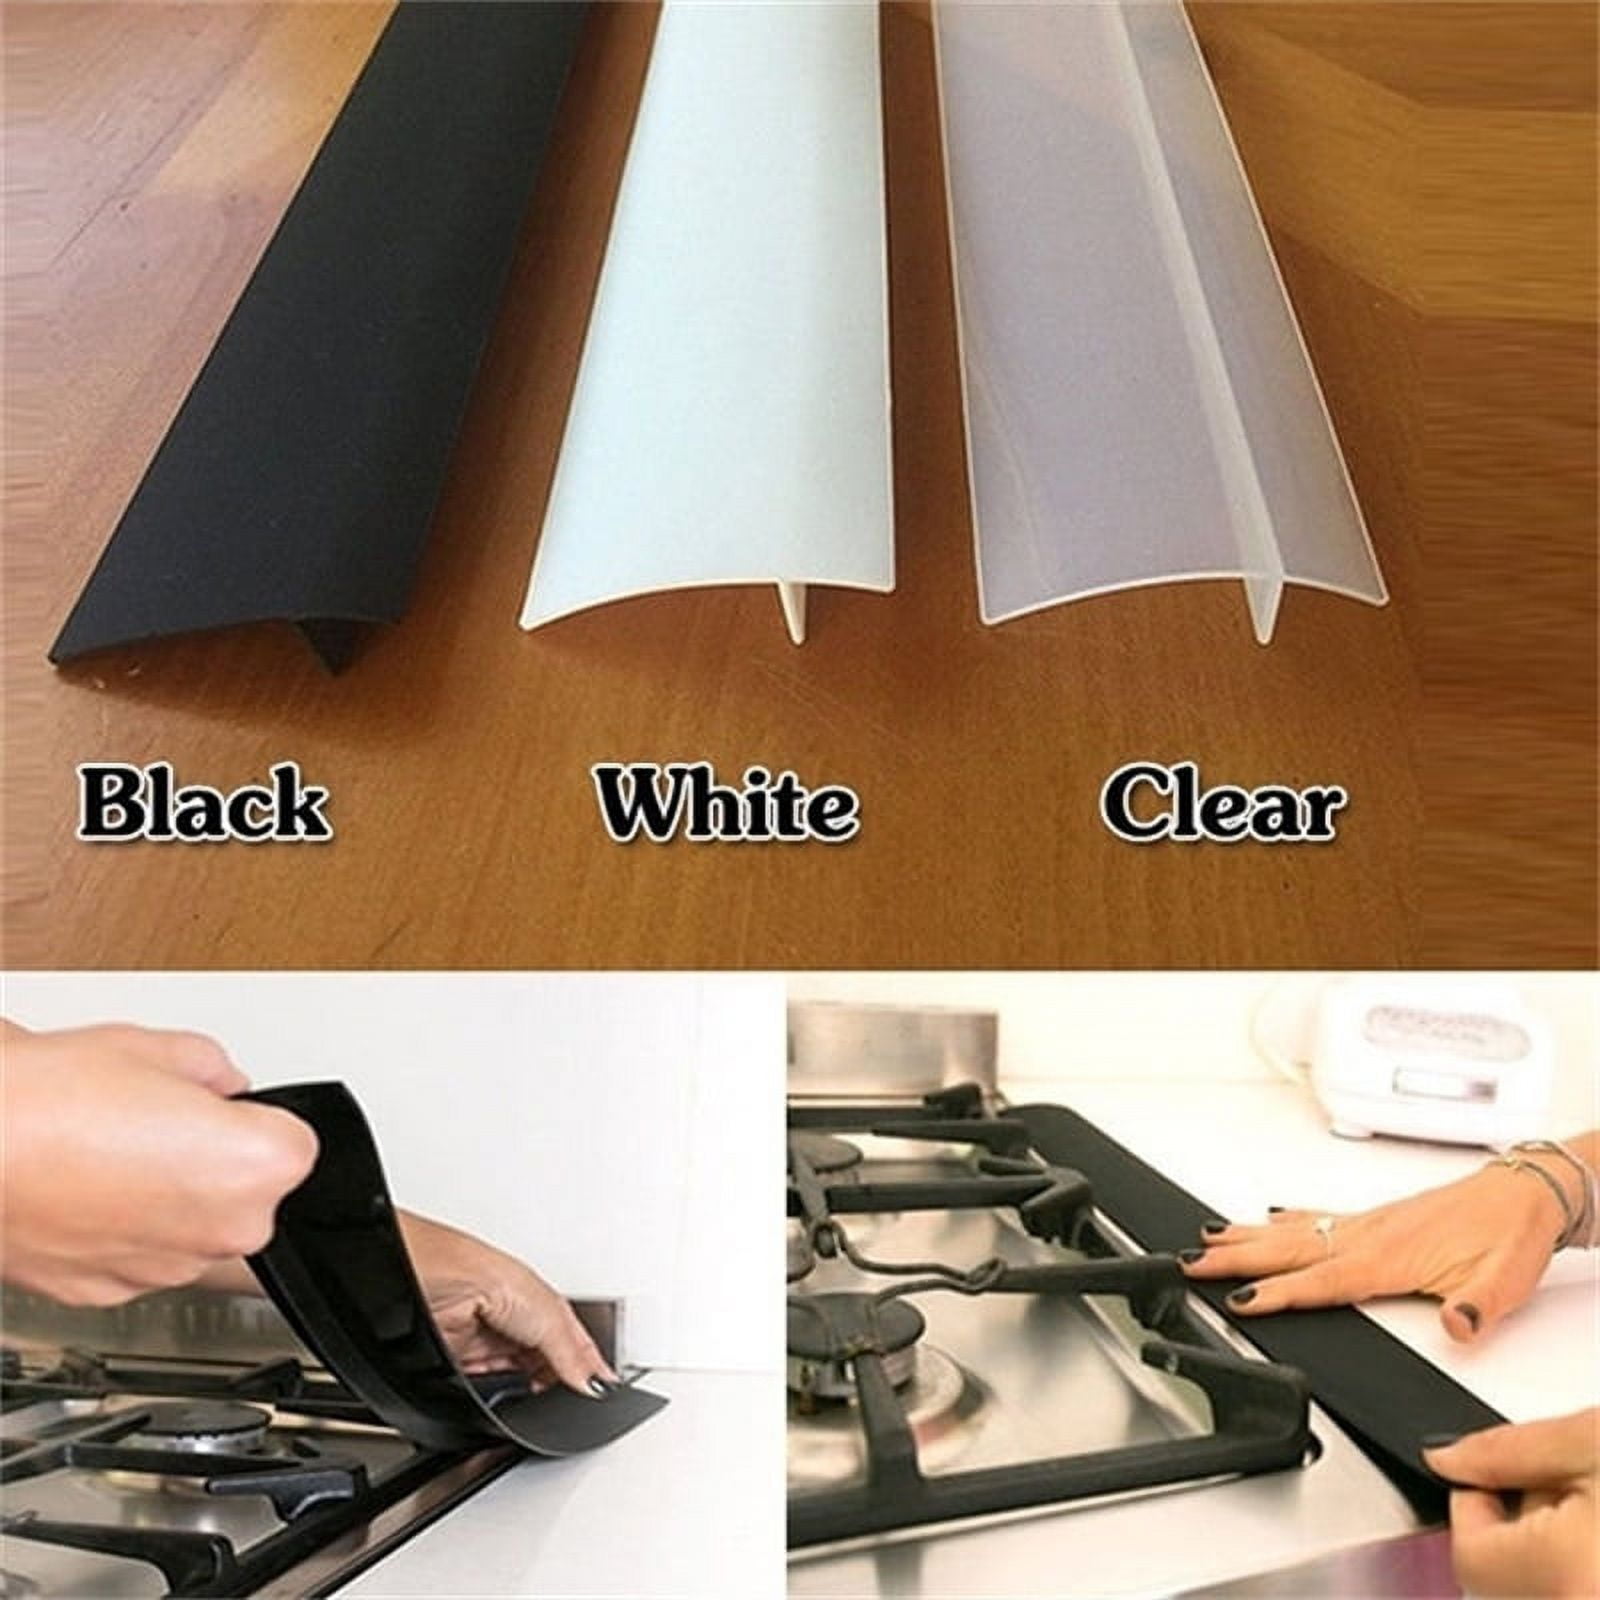 Willstar Stove Gap Covers 25 inch New Silicone Heat Resistant Stove Counter Gap  Cover Against Oil Stains Clean Mat for Kitchen (2Pcs) 